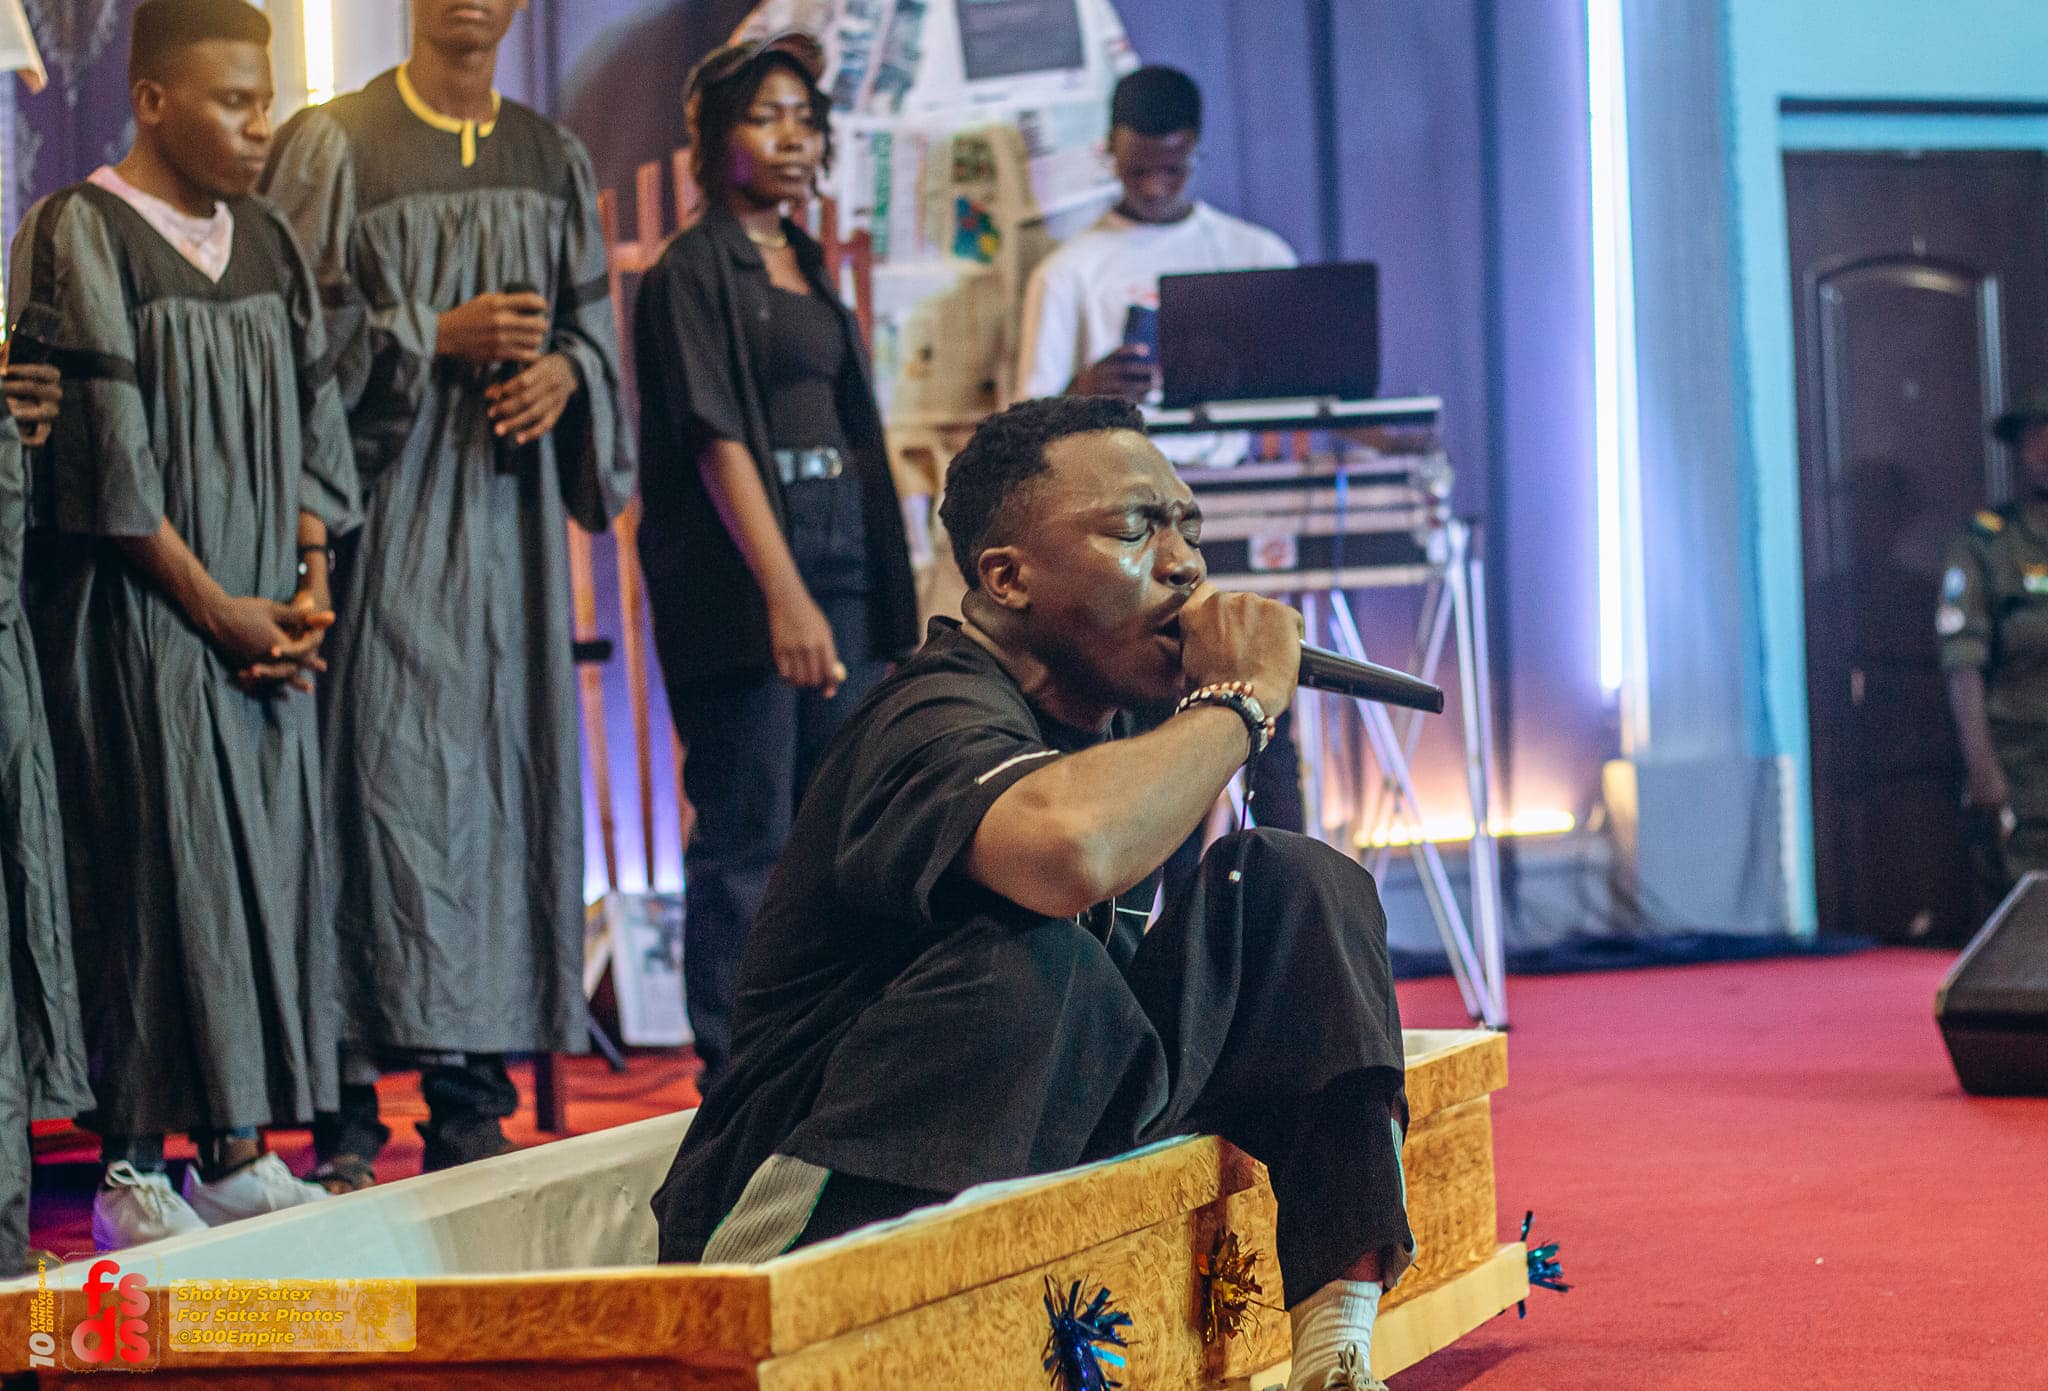 Drama as gospel singer arrives on stage in coffin to perform